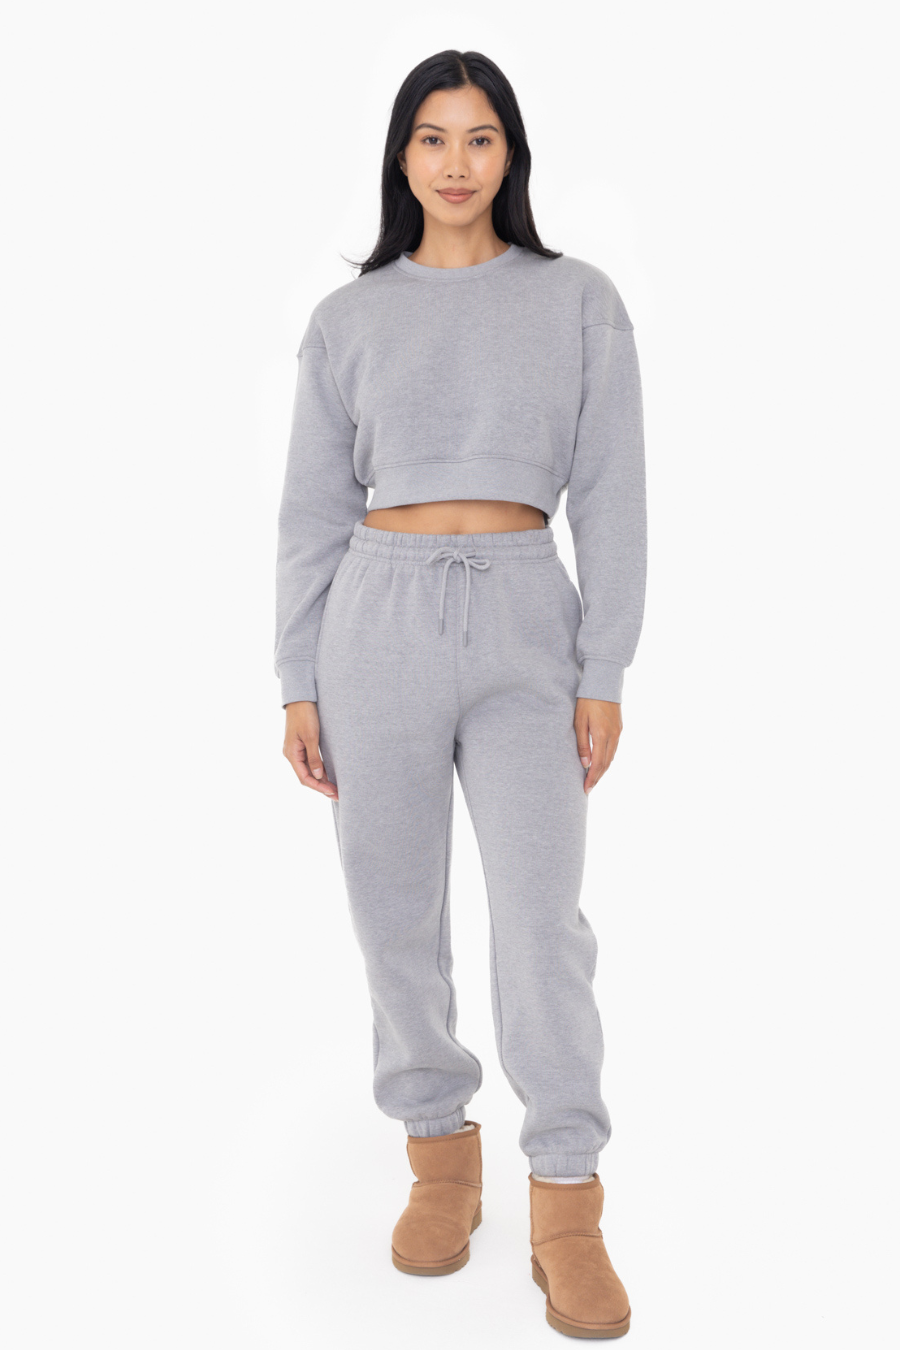 full front view of model wearing Georgina cropped fleece sweatshirt with matching pants, sold separately 